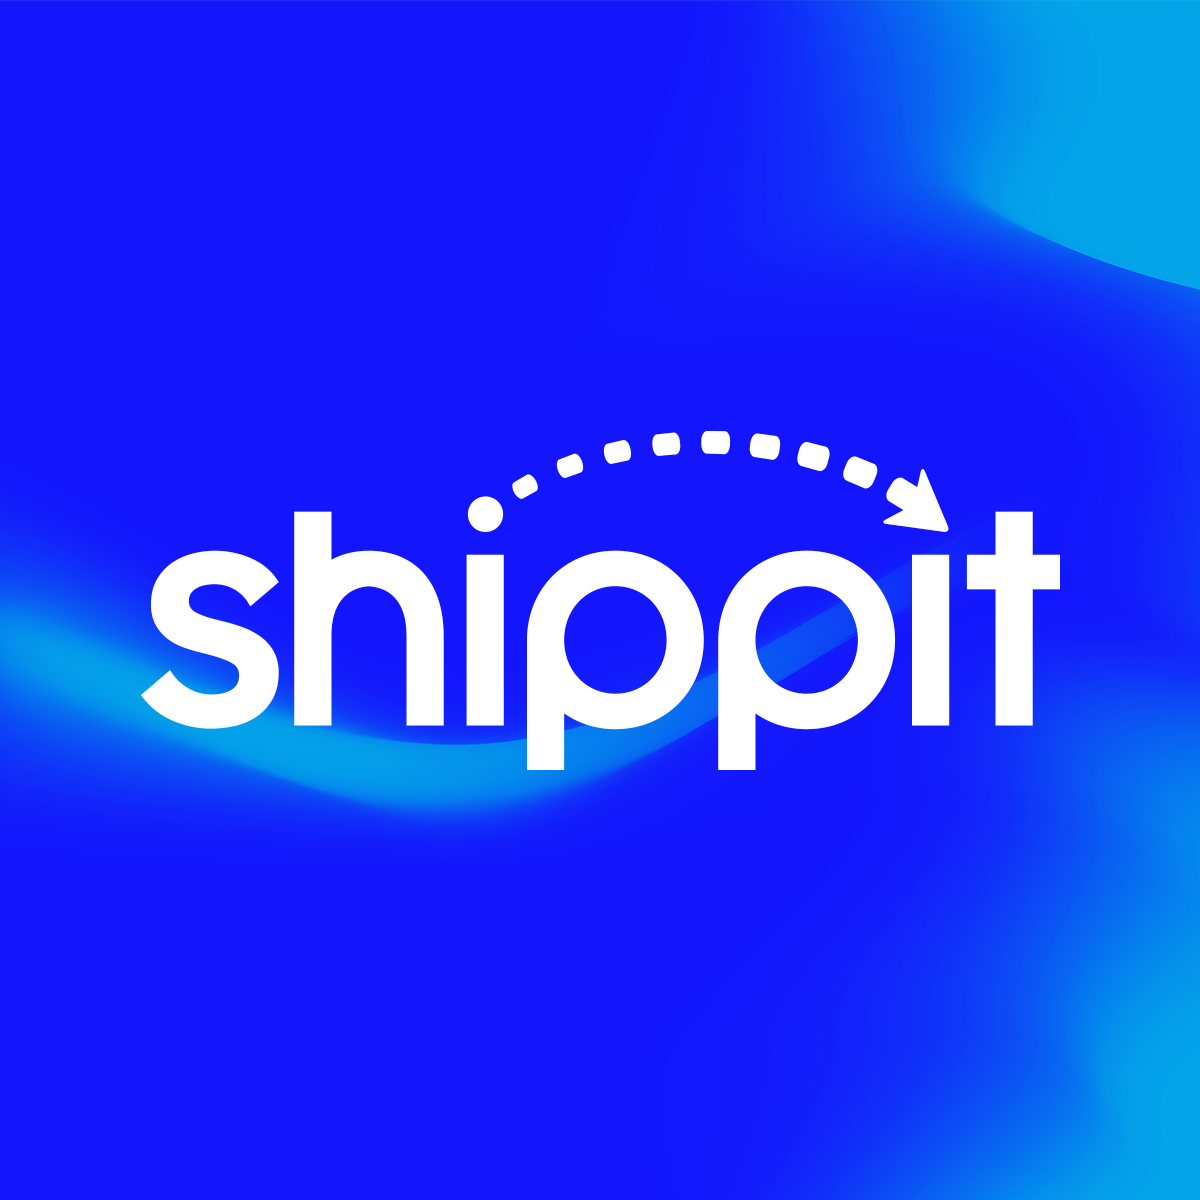 Hire Shopify Experts to integrate Shippit app into a Shopify store